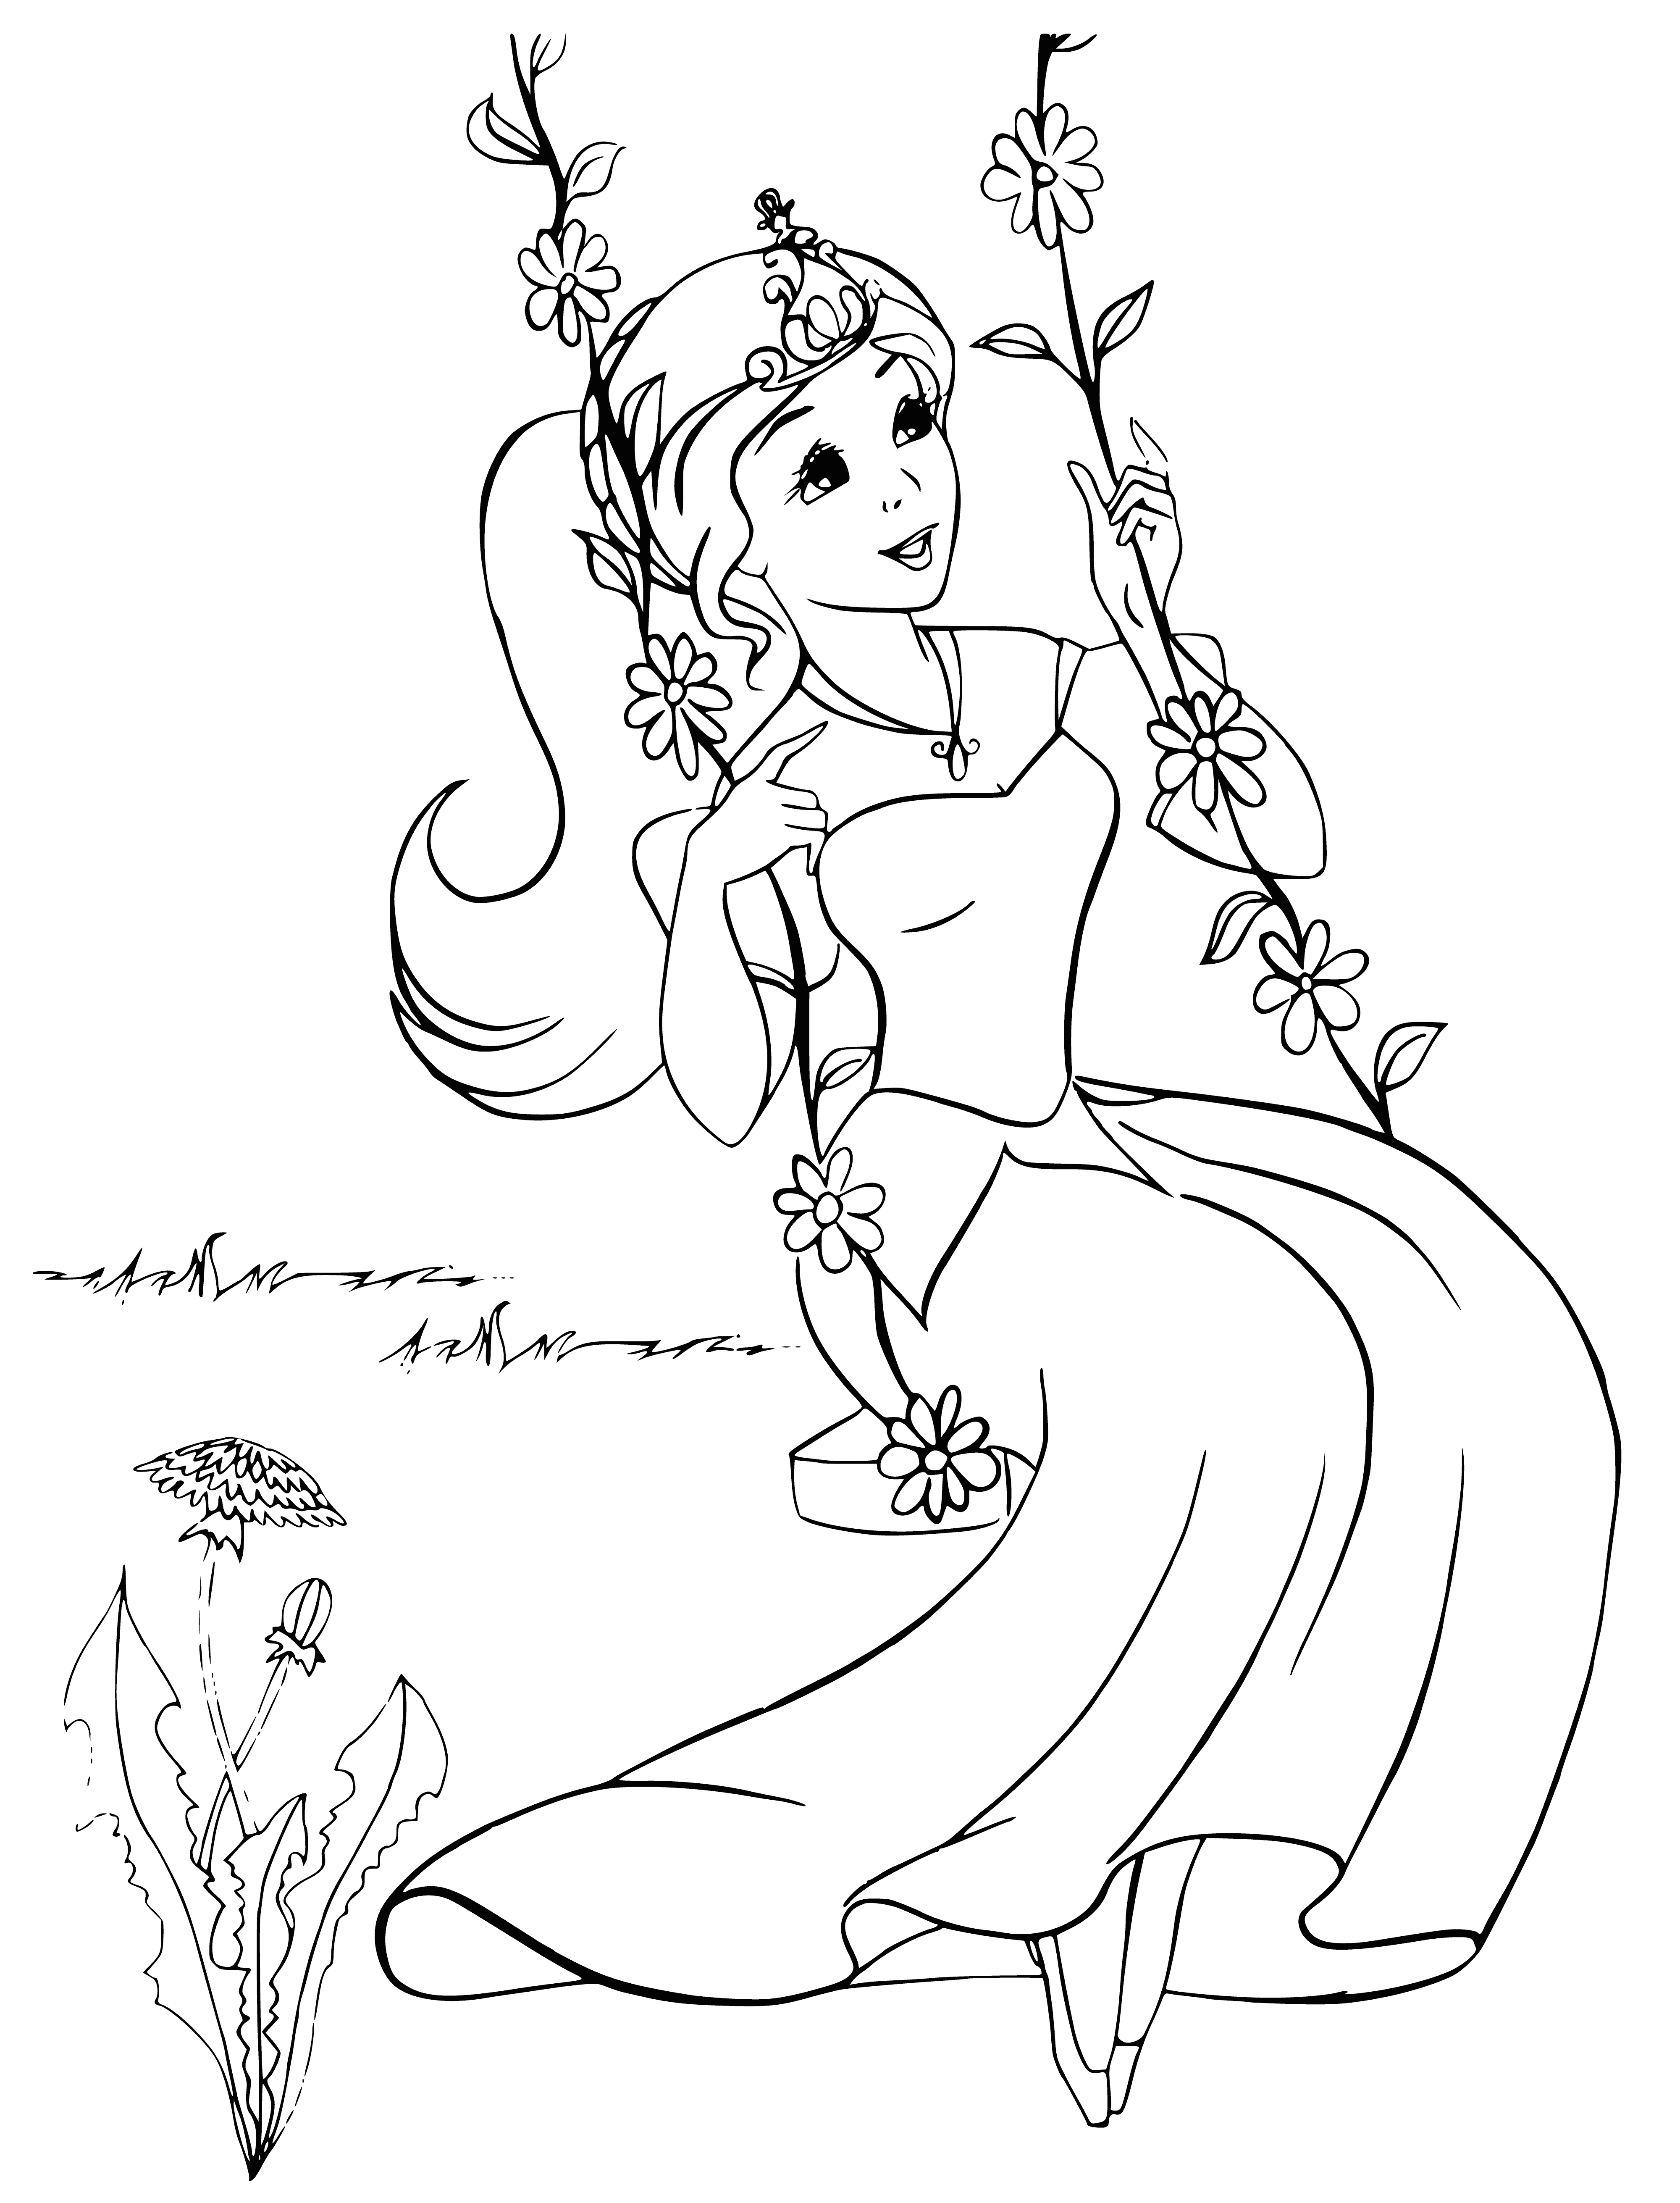 coloring page: Princess smiles on swing wearing crown & dress; looks deeply content.